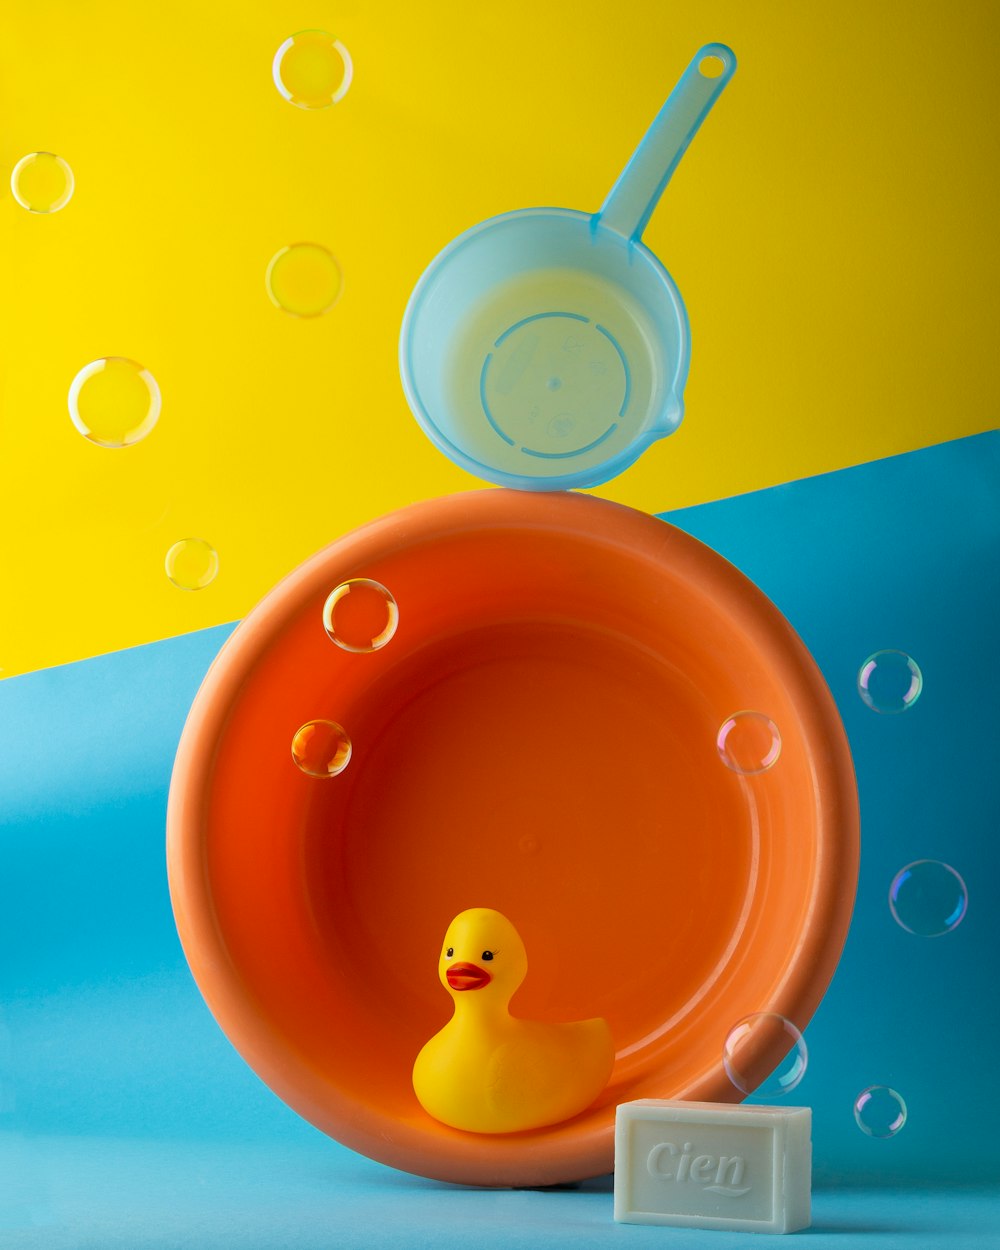 a yellow rubber duck in a red bowl